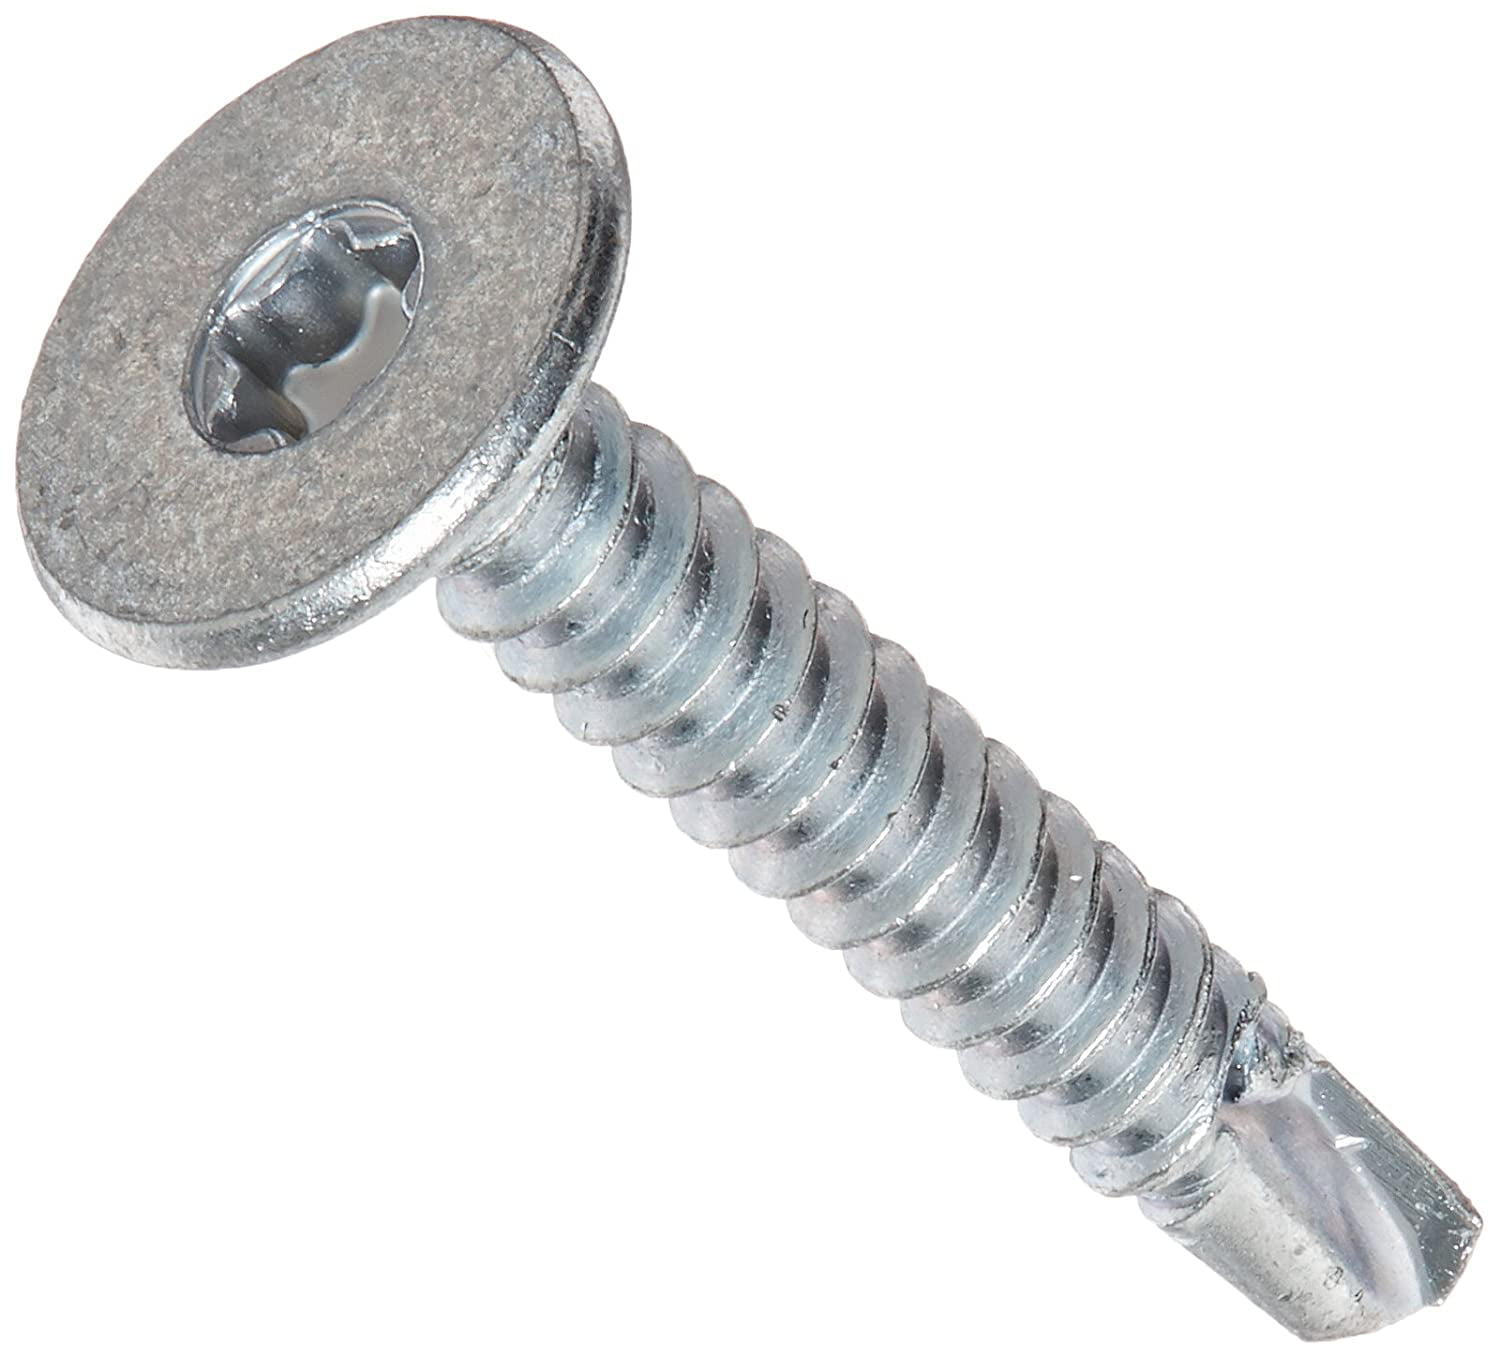 Phillips Drive #3 Drill Point Pan Head #12-14 Thread Size 5 Length Zinc Plated Finish Pack of 10 Steel Self-Drilling Screw